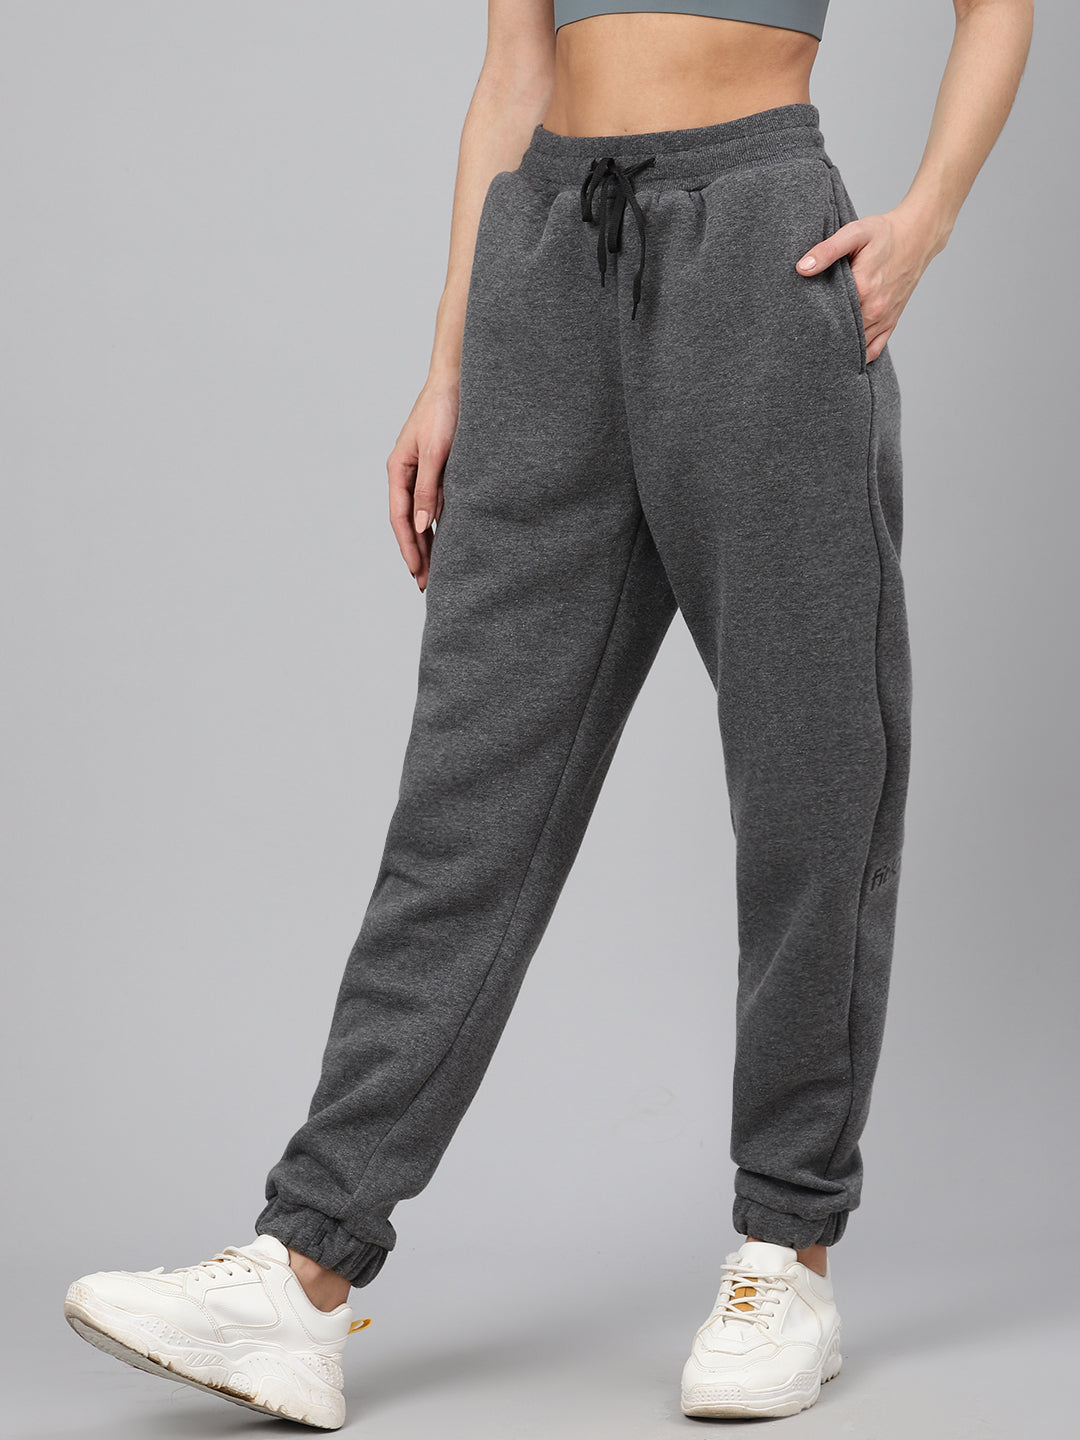 Women's Charcoal Grey Solid Fleece Regular Fit Joggers – Fitkin